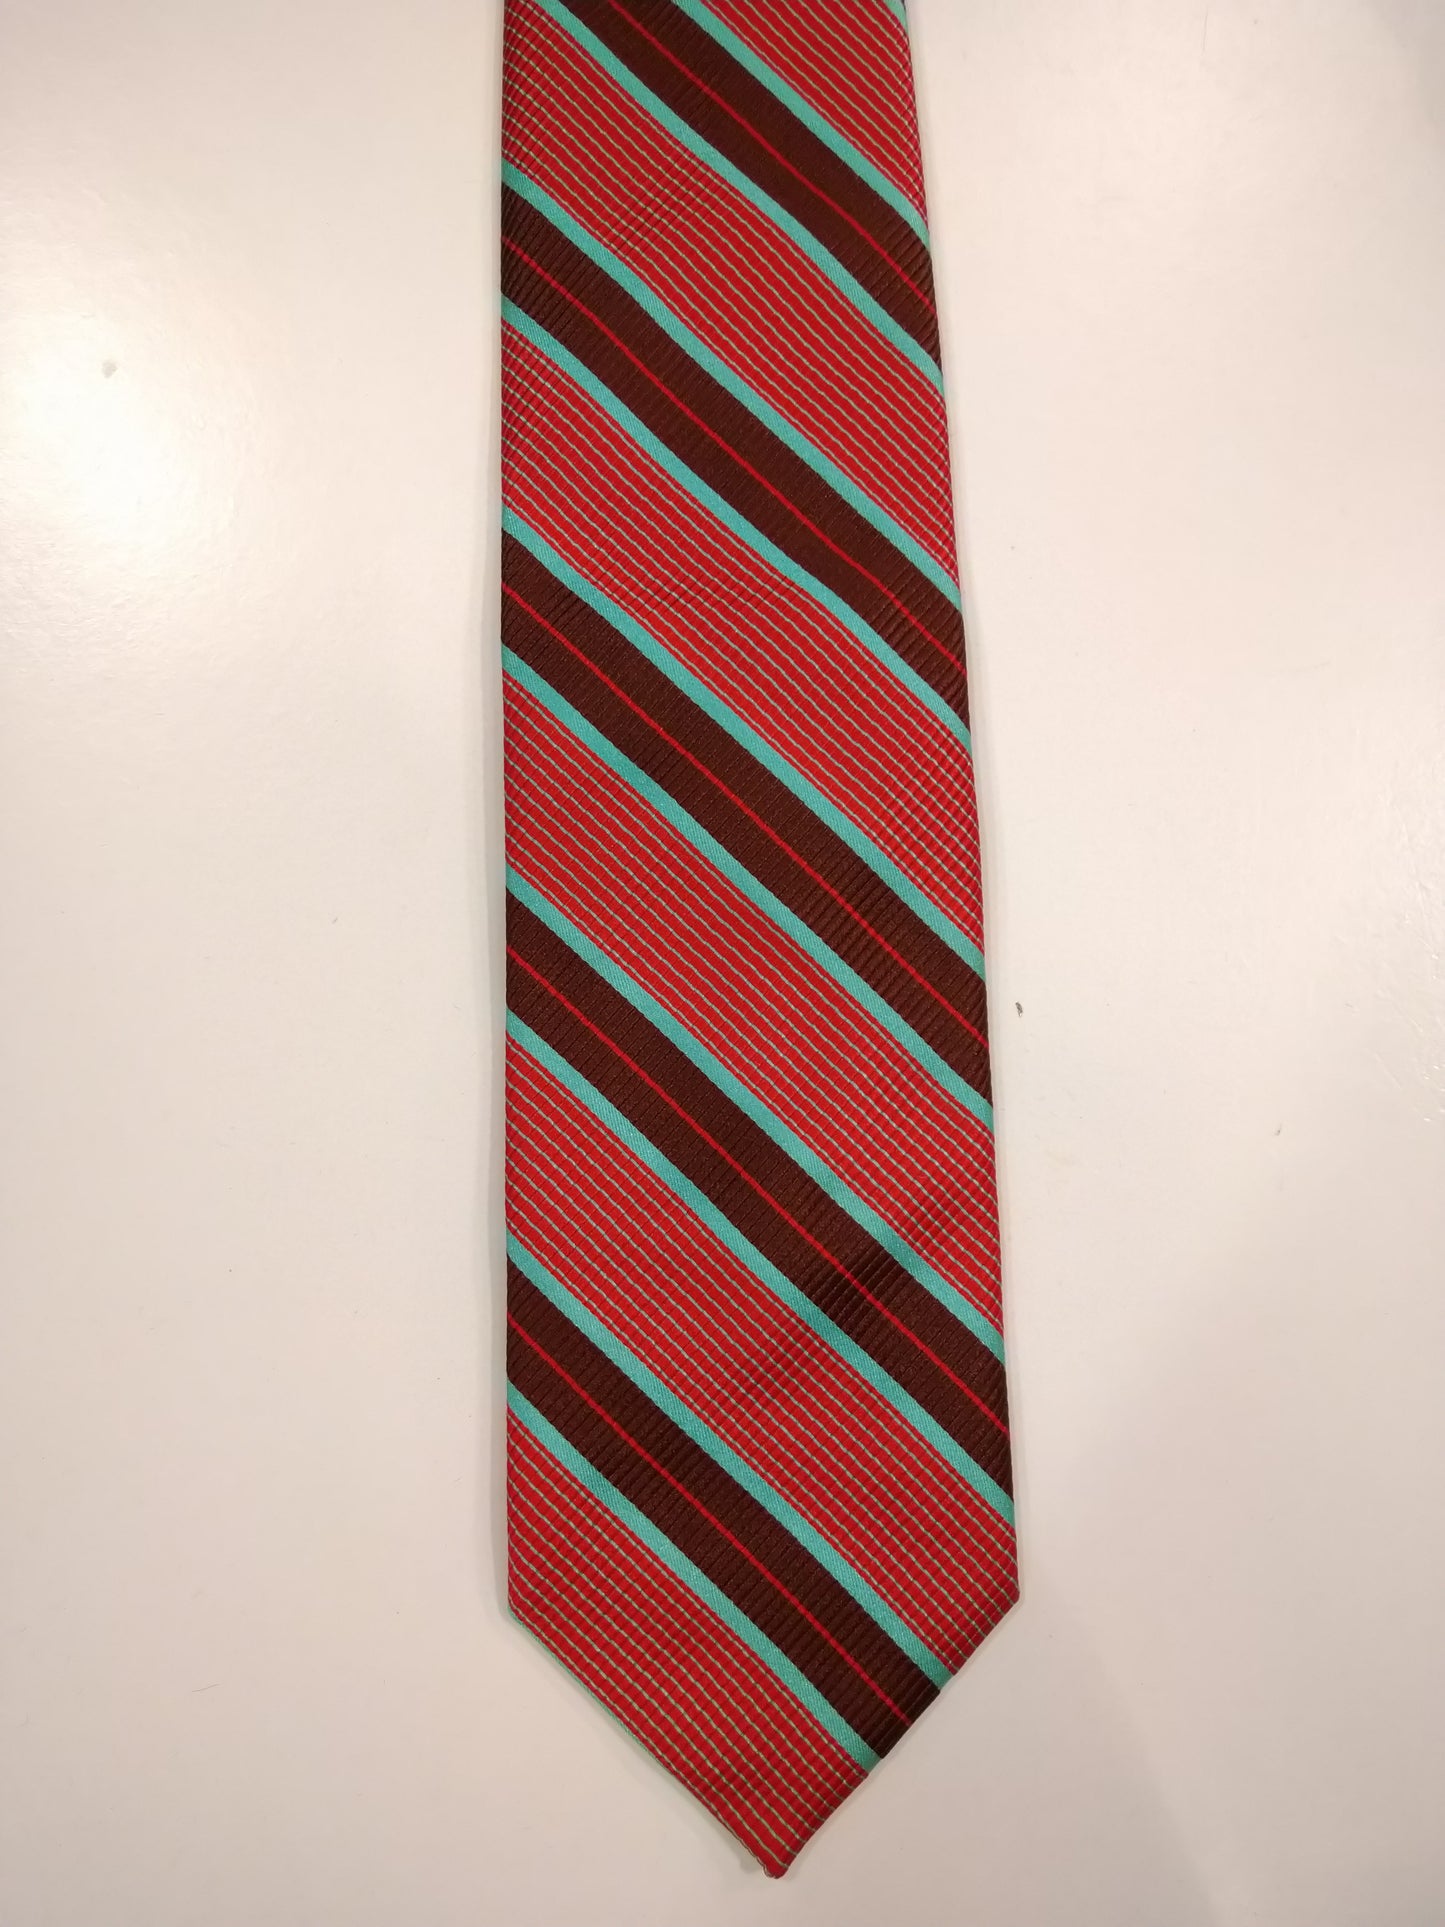 Jay Pee Original Mabed in Como Silk Tie. Turquoise brun rouge rayé.